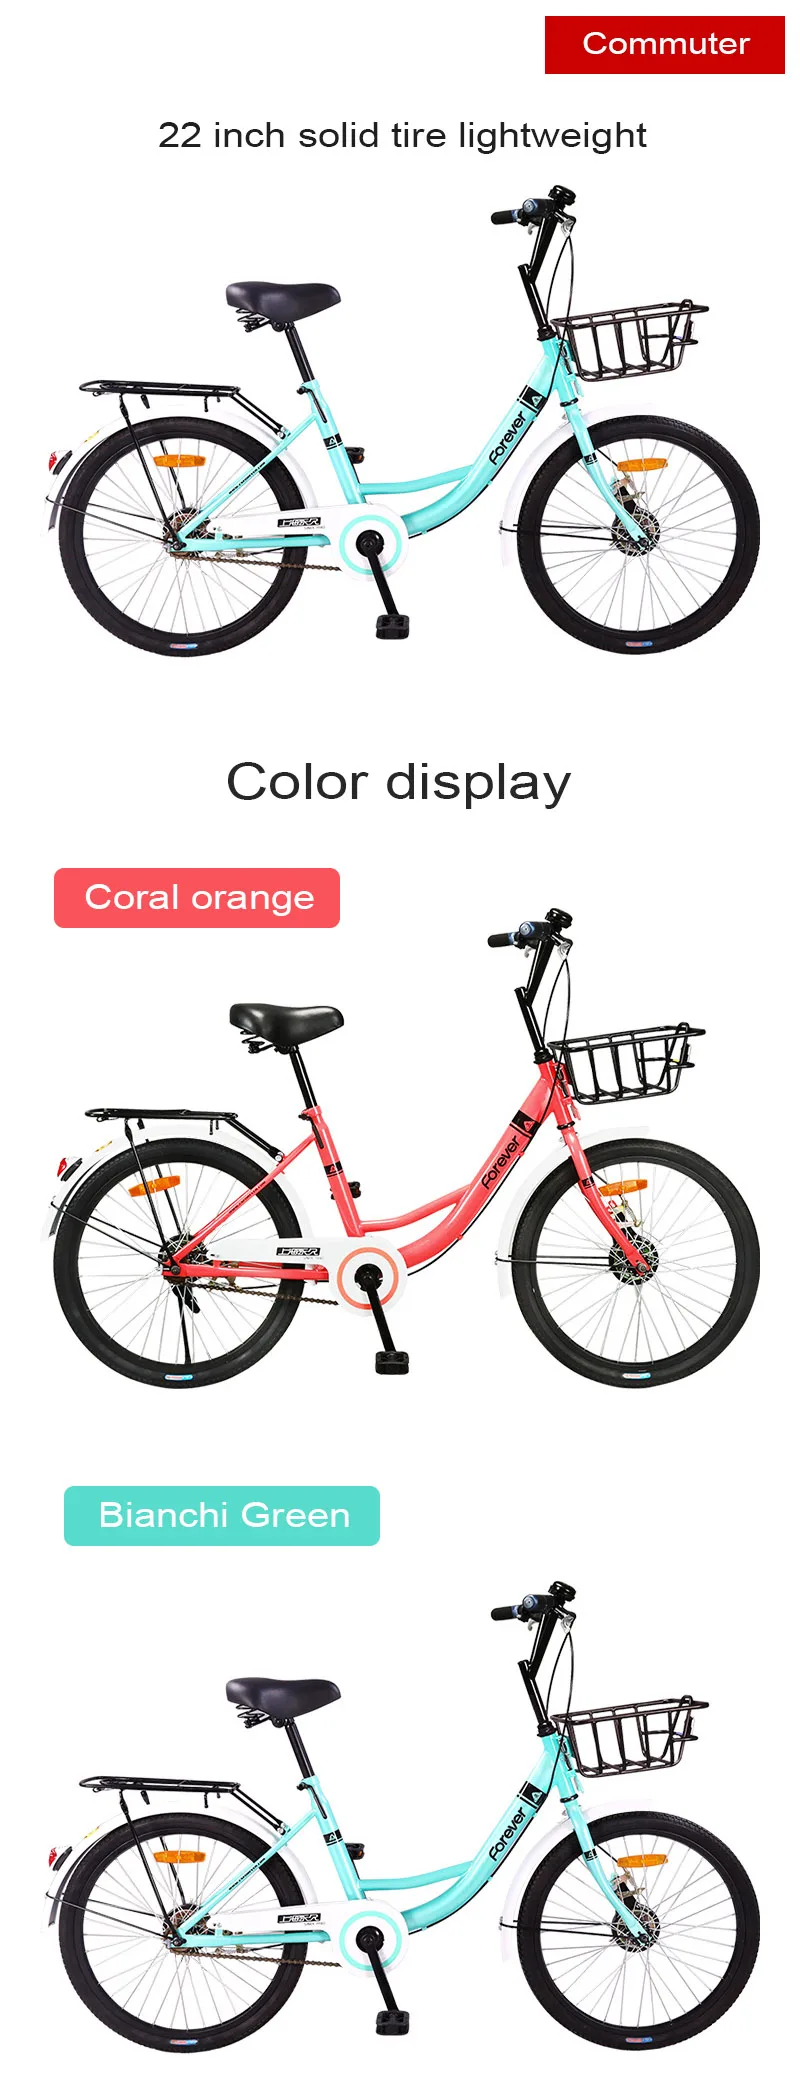 Sale Solid Tire 22 Inch Bicycle Female Adult Student Bicycle Lady Ordinary Travel Commuter Sharing 0